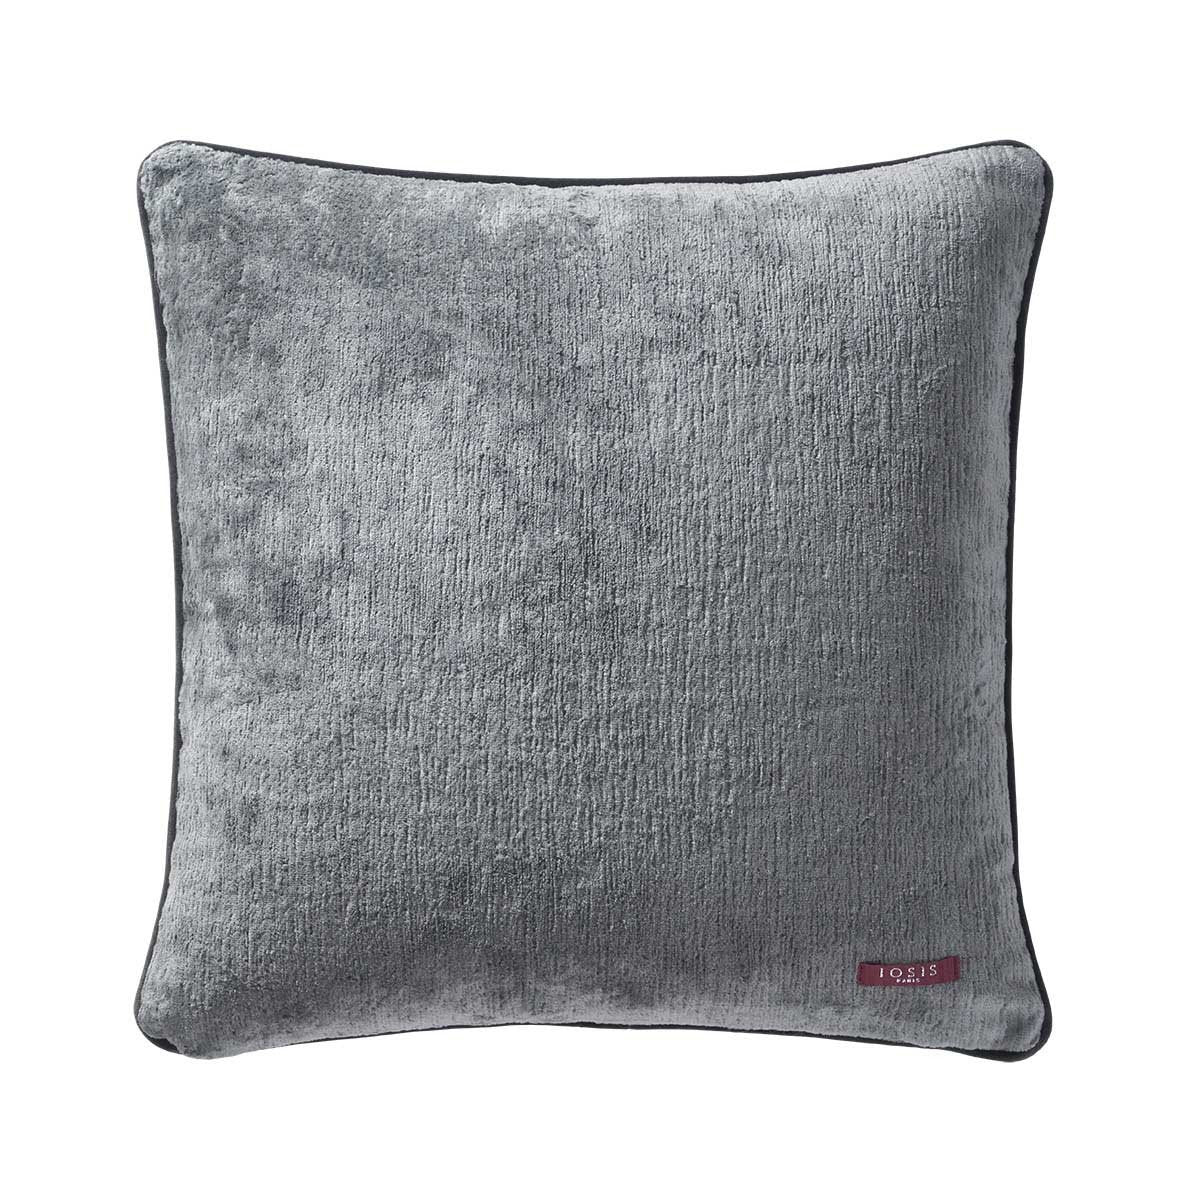 Fig Linens - Boromee Zinc Decorative Pillow by Iosis - Back